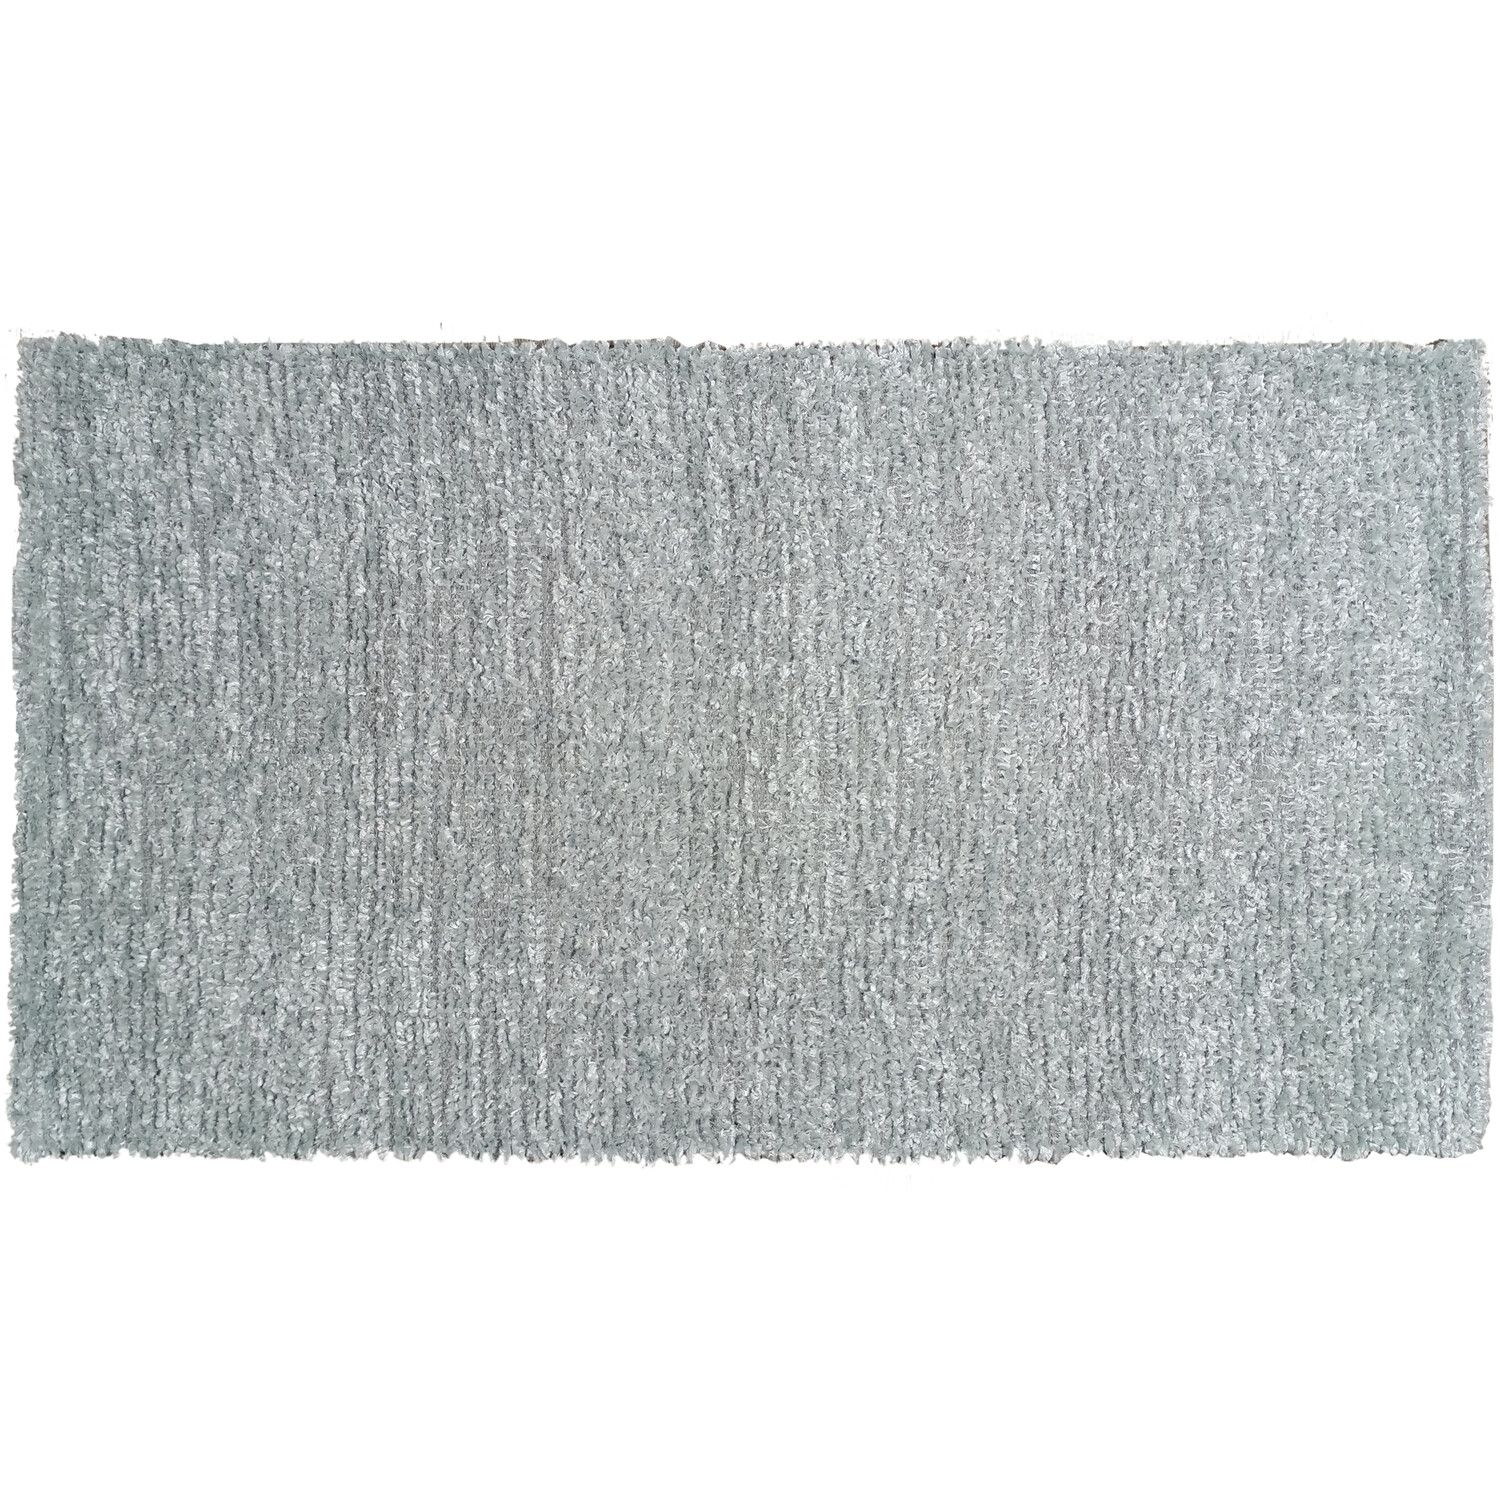 Chenille Luxe Rug - Silver Image